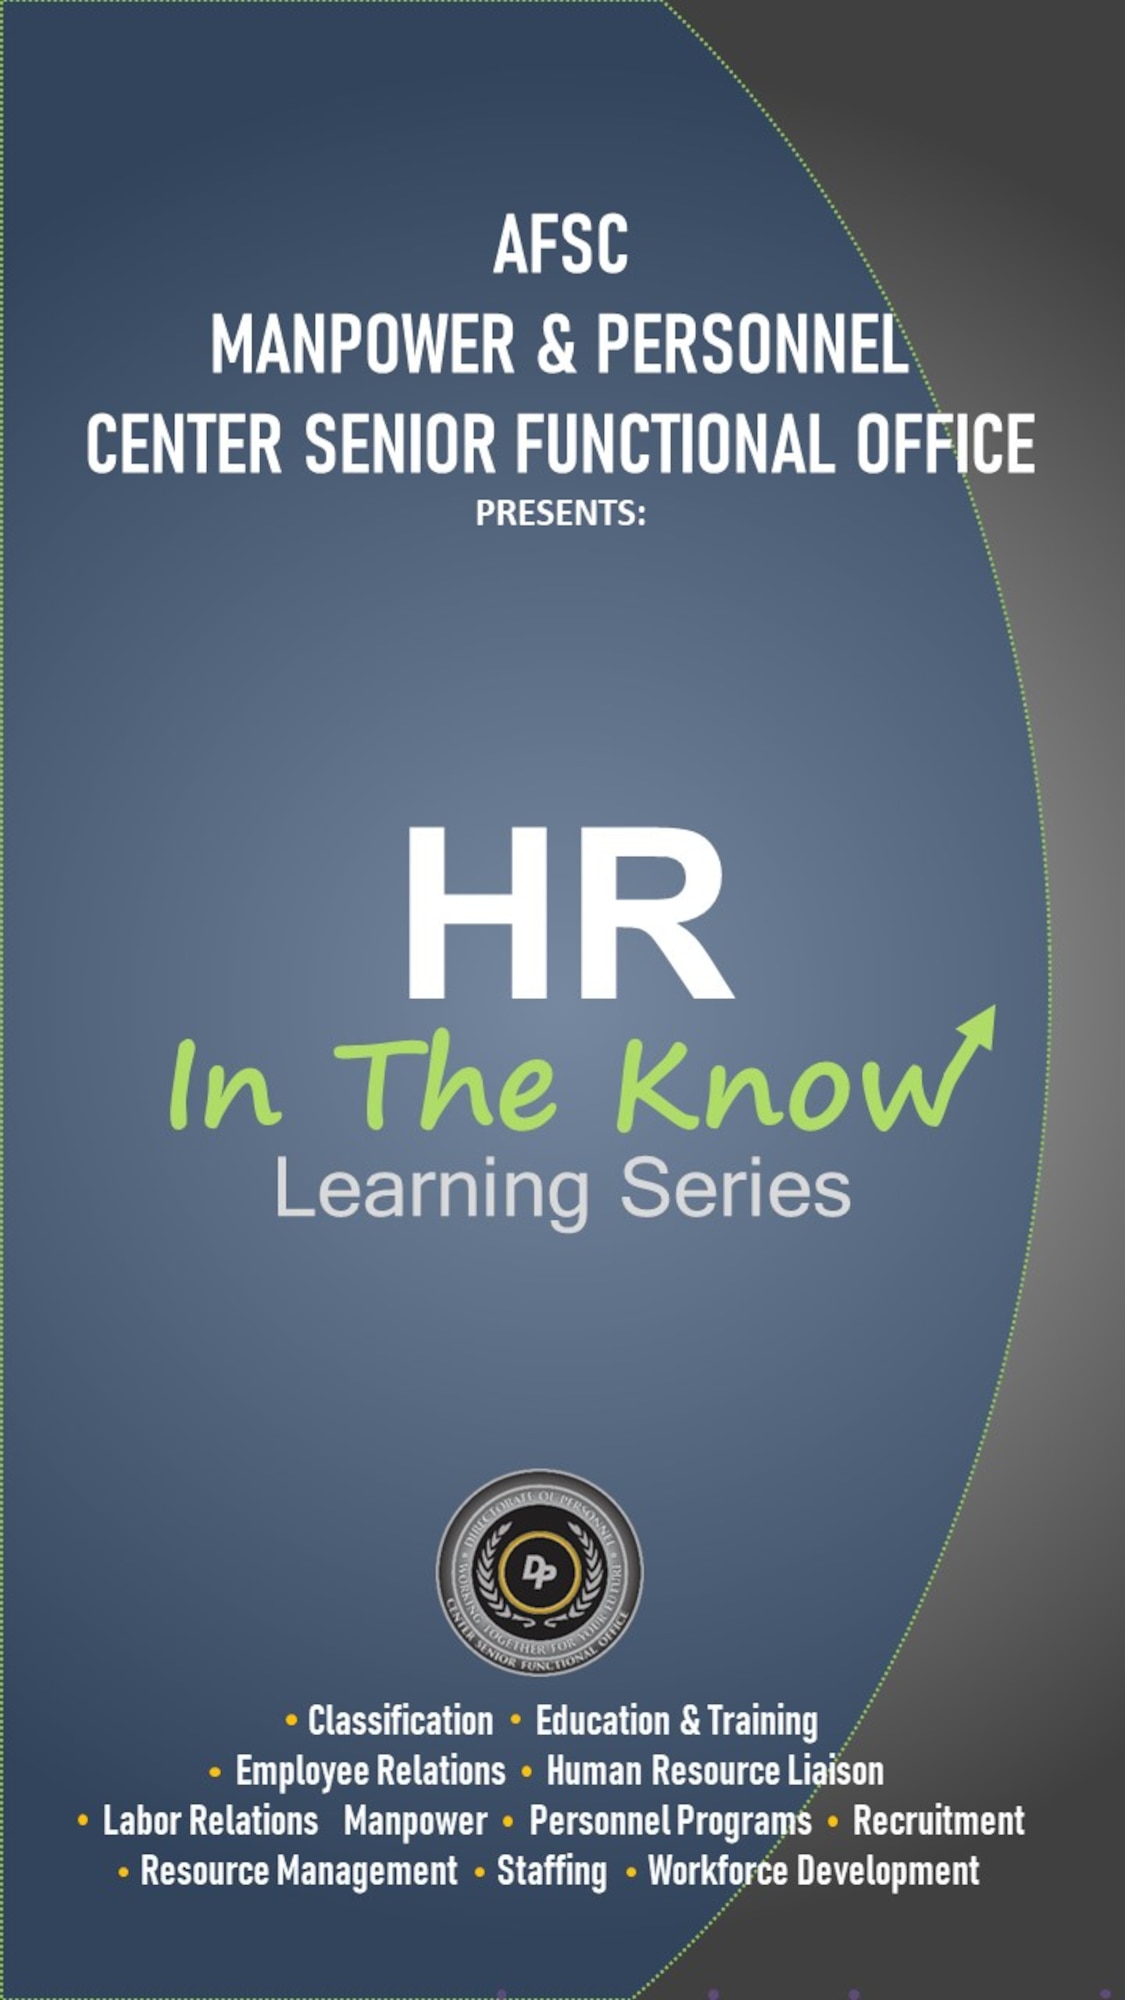 HR In the Know learning series